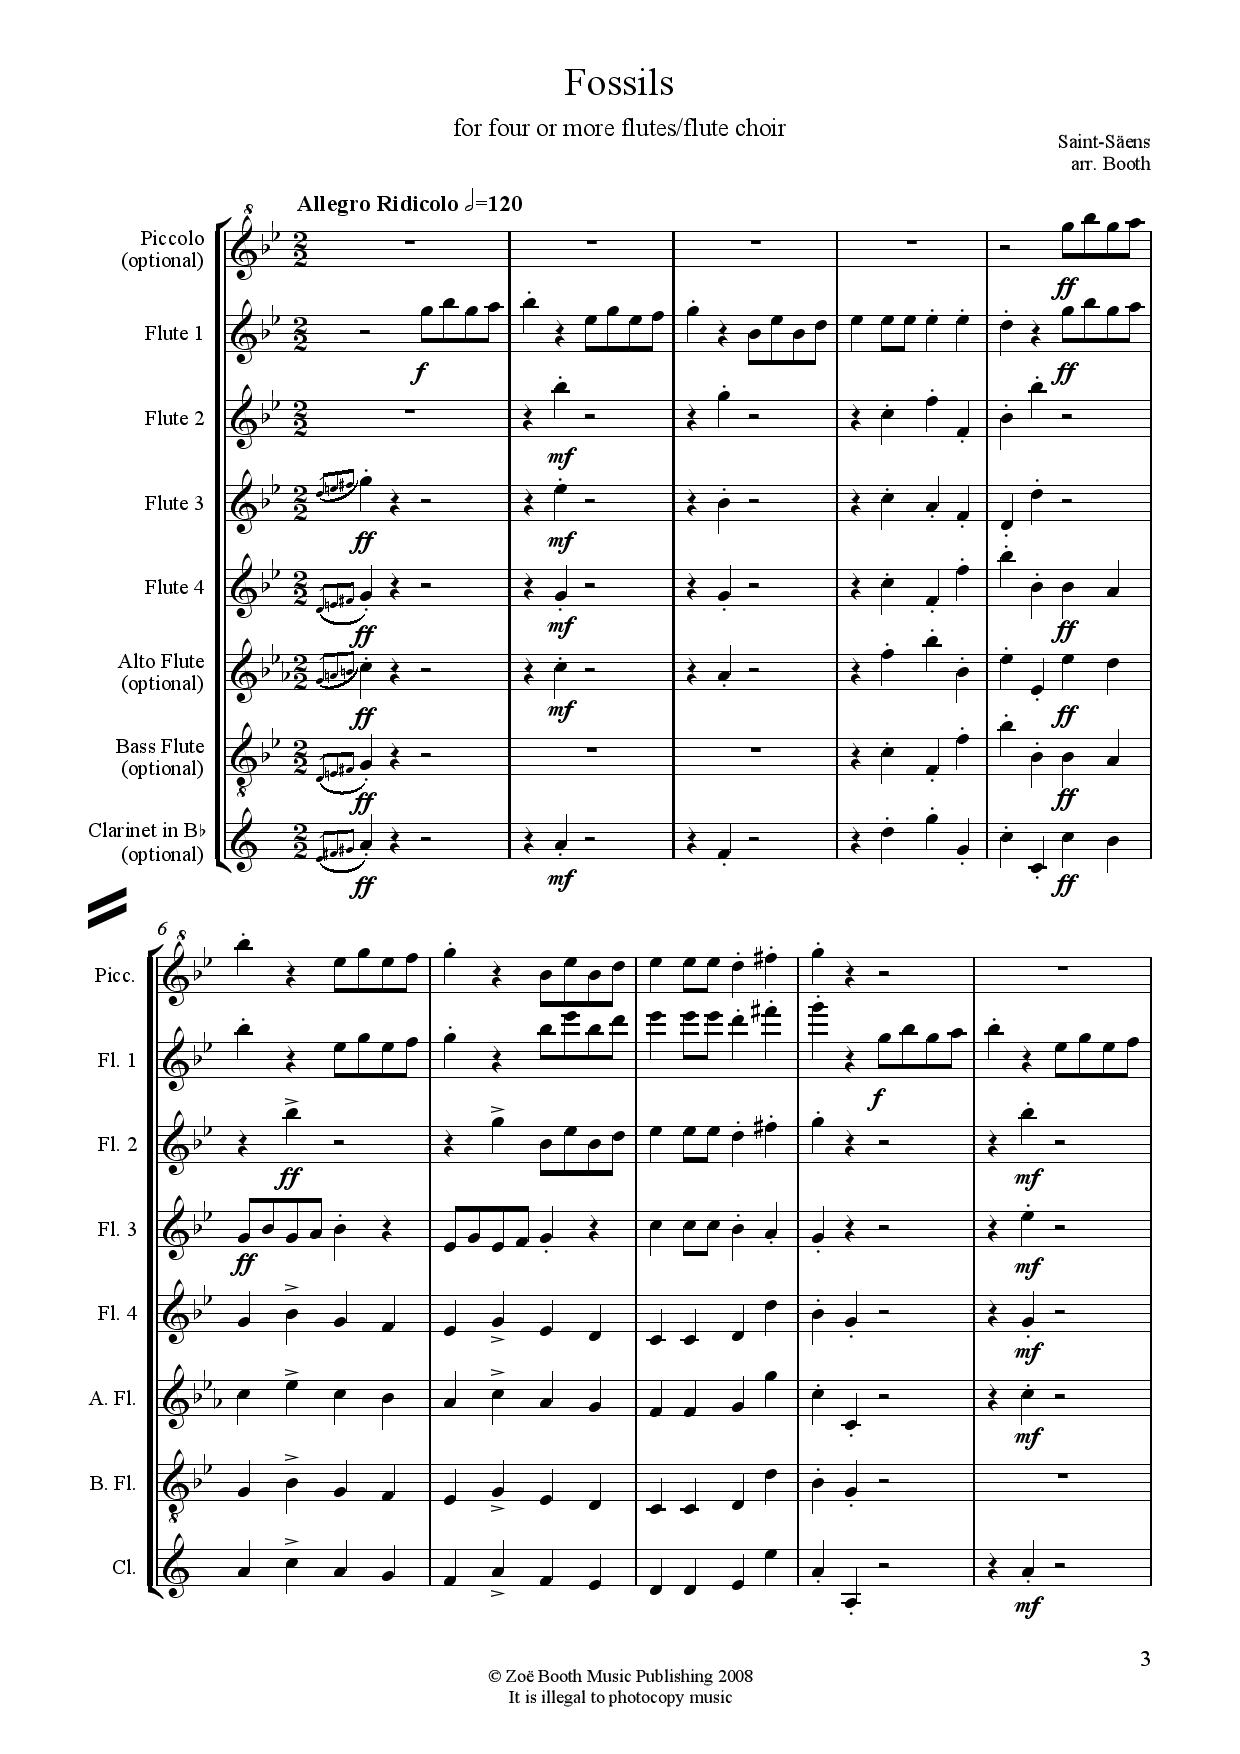 Fossils by Saint-Saëns  arranged by Zoë Booth for four or more flutes/flute choir